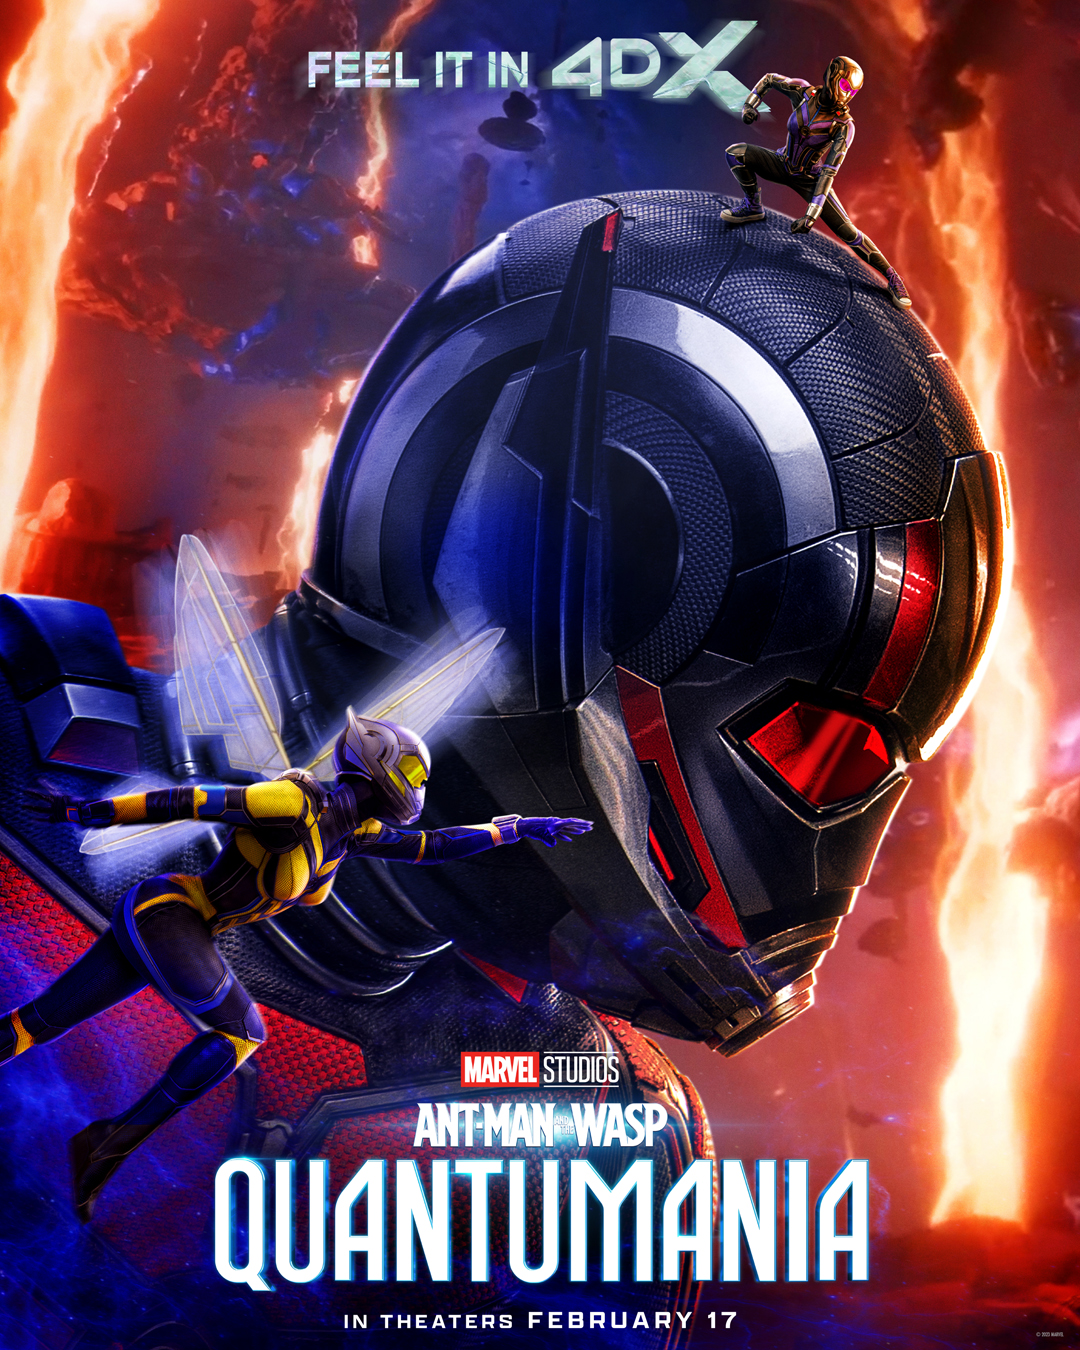  Marvel Studios' Ant-Man and The Wasp: Quantumania | 4DX